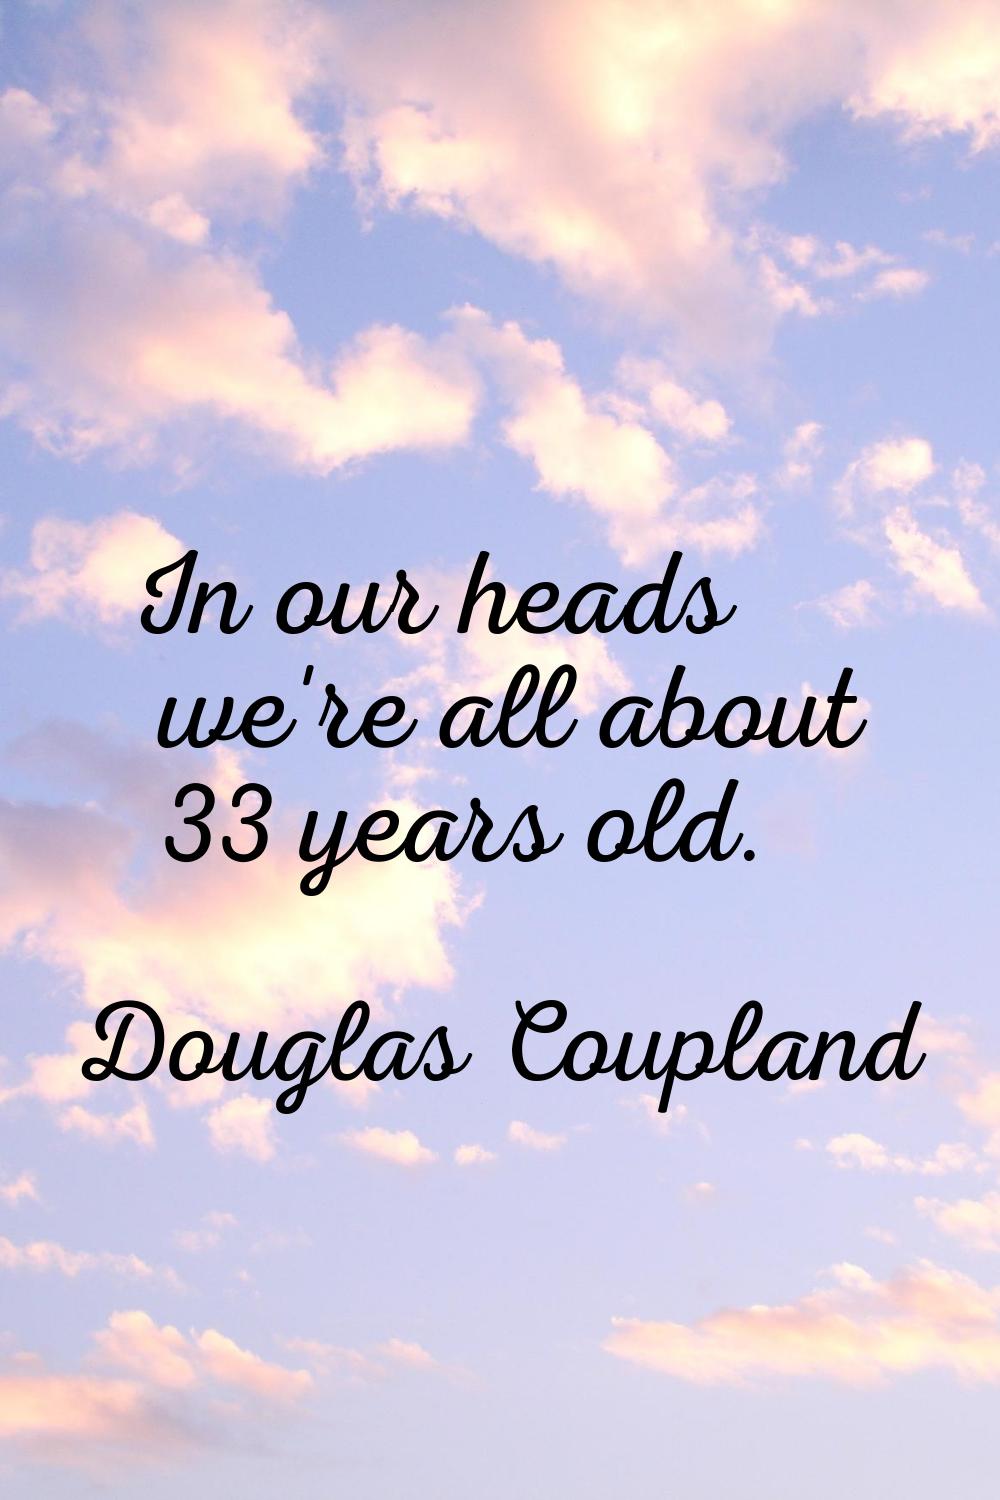 In our heads we're all about 33 years old.